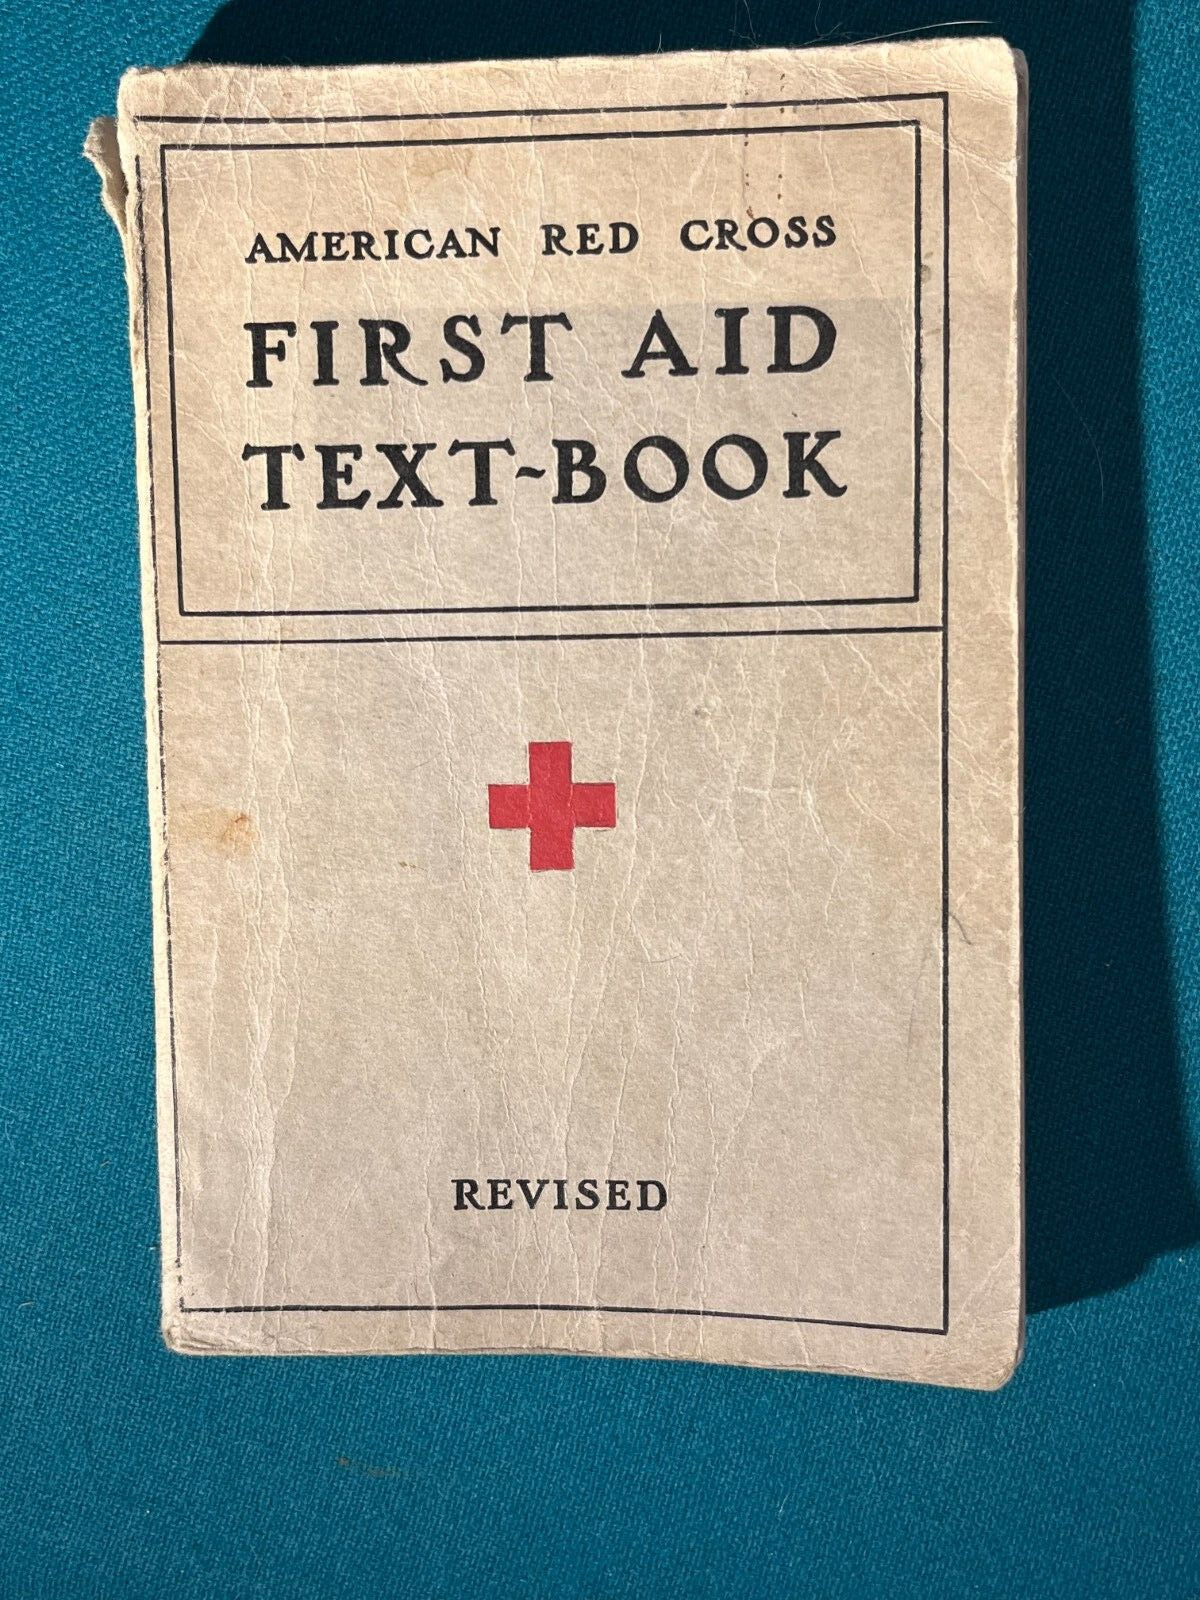 Vintage American Red Cross First Aid Text-book, 1940 Revision, well used